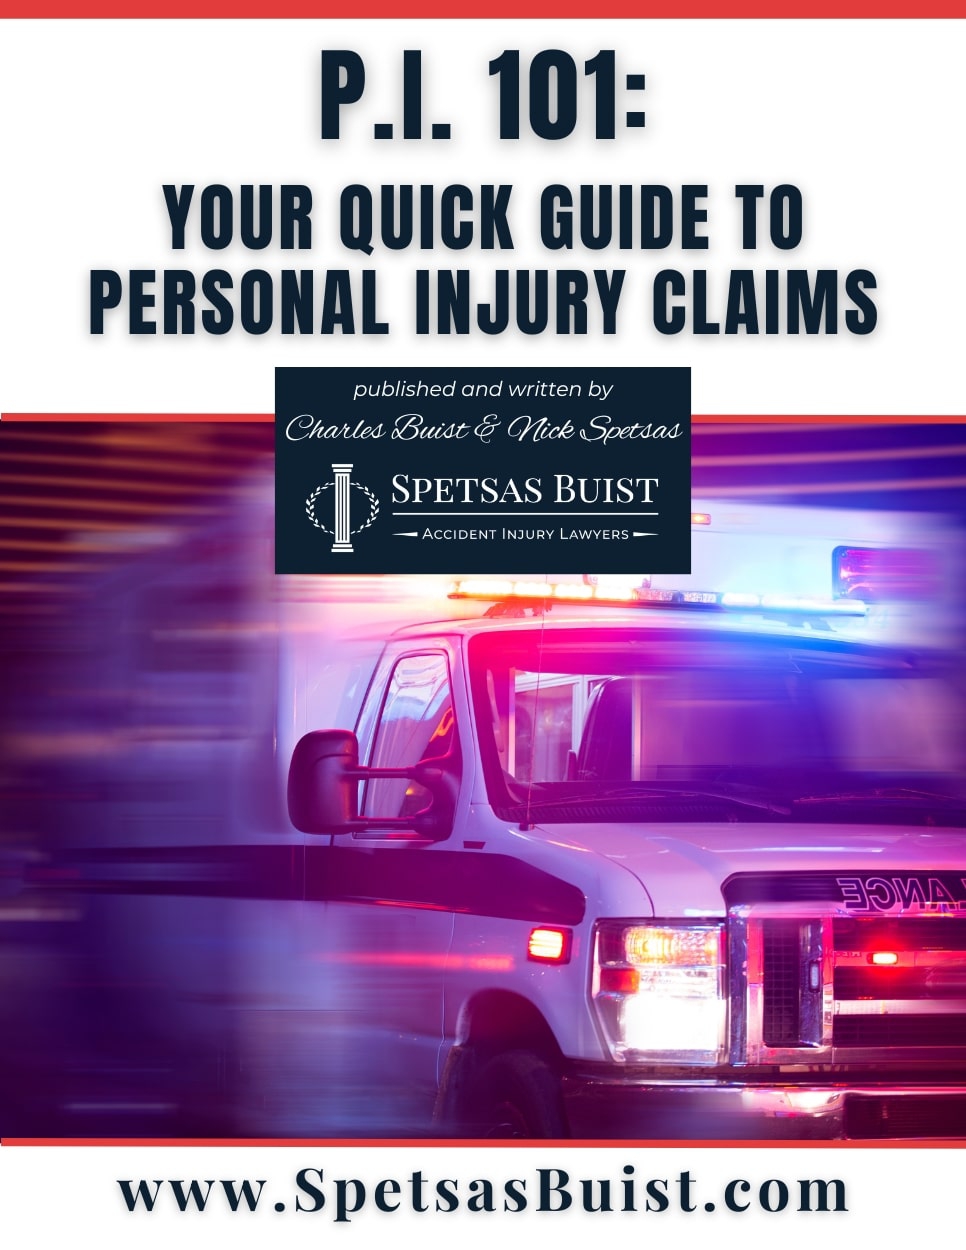 P.I. 101: Your Quick Guide to Personal Injury Claims